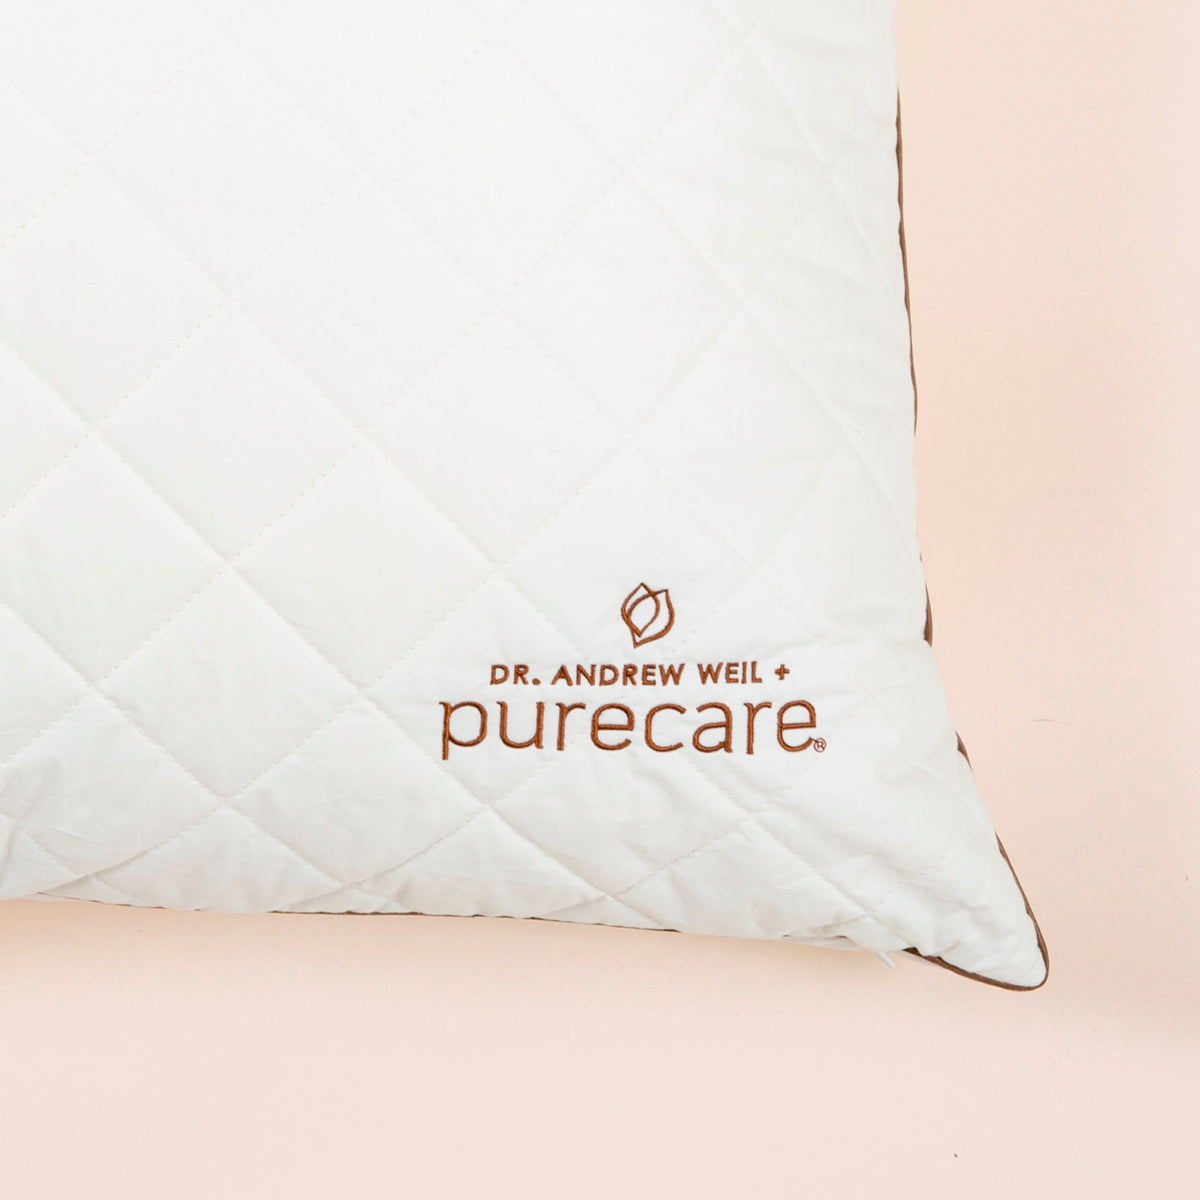 Close-up image of the Dr. Andrew Weil + Purecare logo on bottom right corner of Euro Pillow Insert